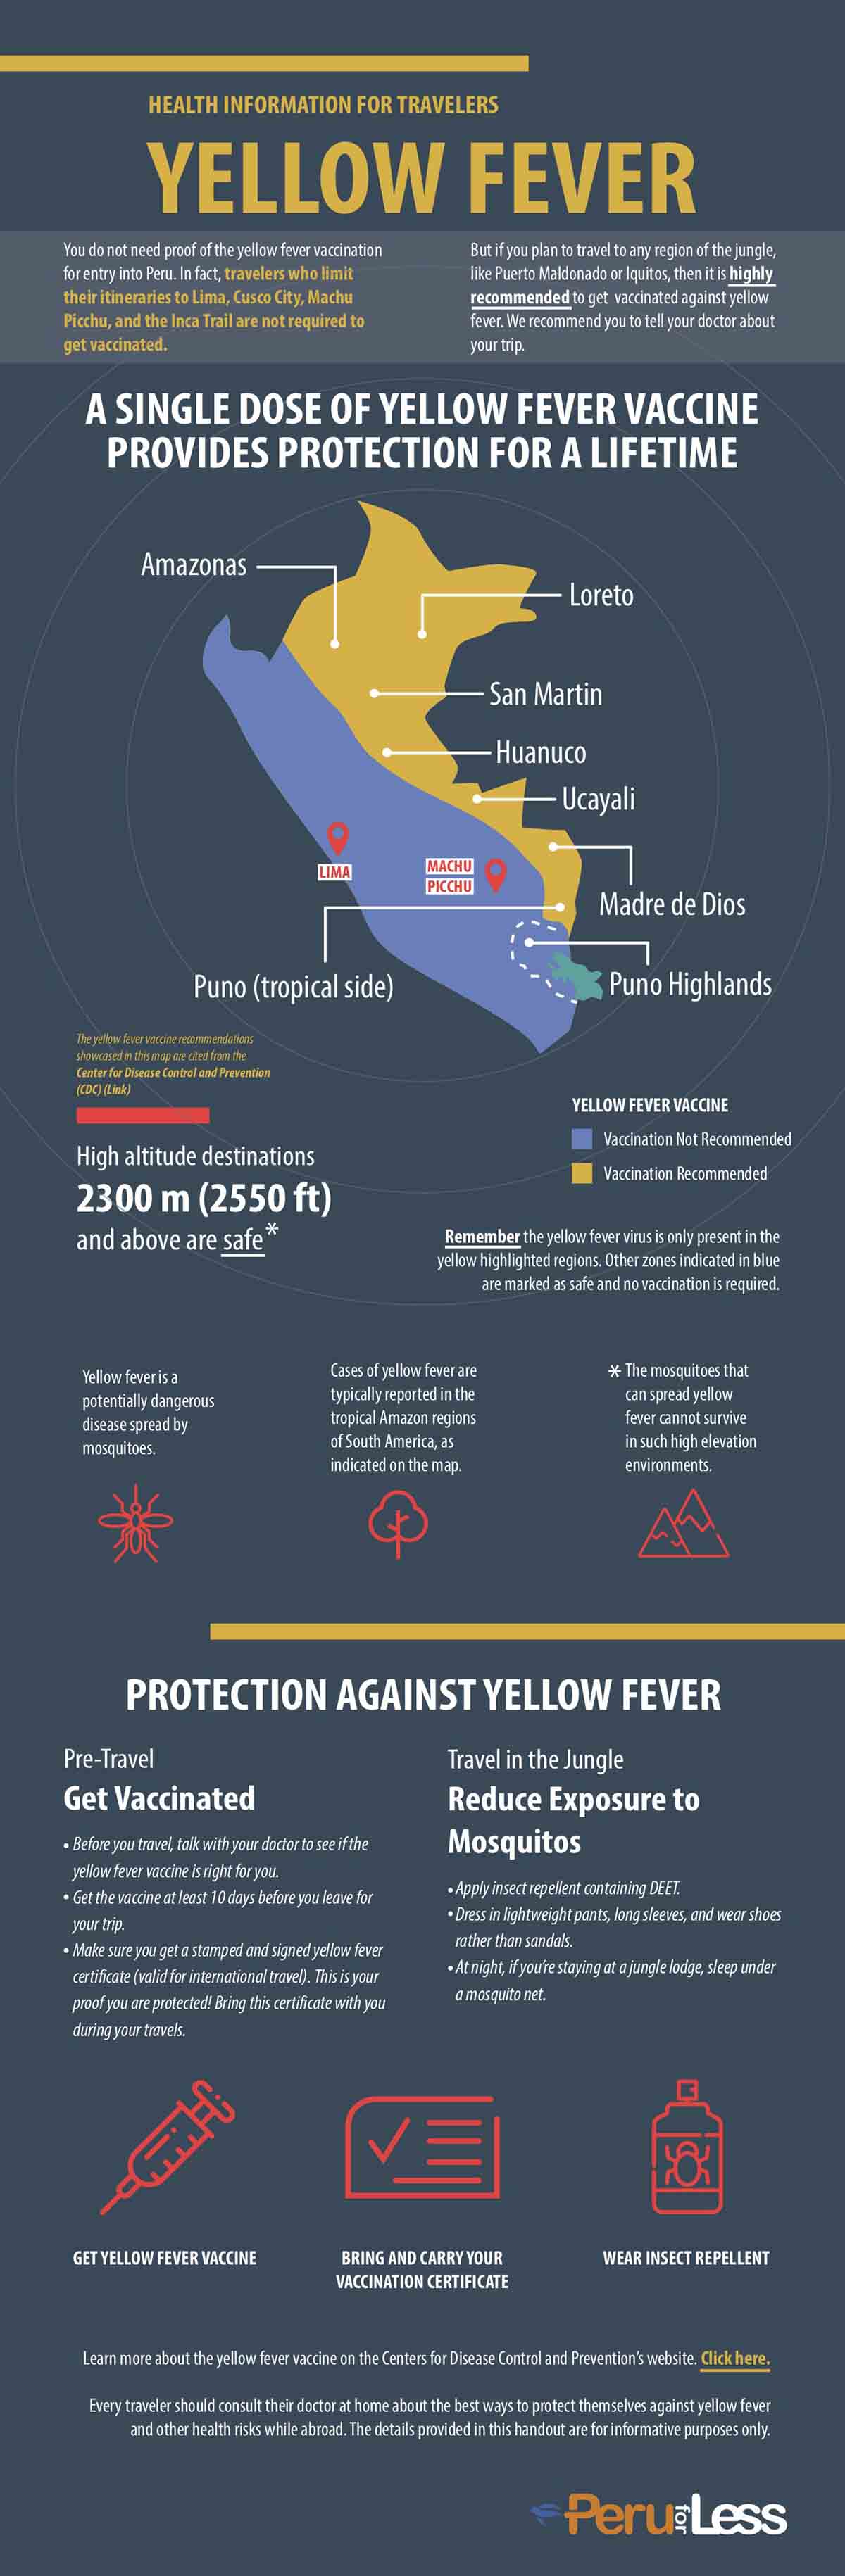 Yellow fever is transmitted by mosquitoes in the Amazon regions of Peru. Vaccination is recommended.